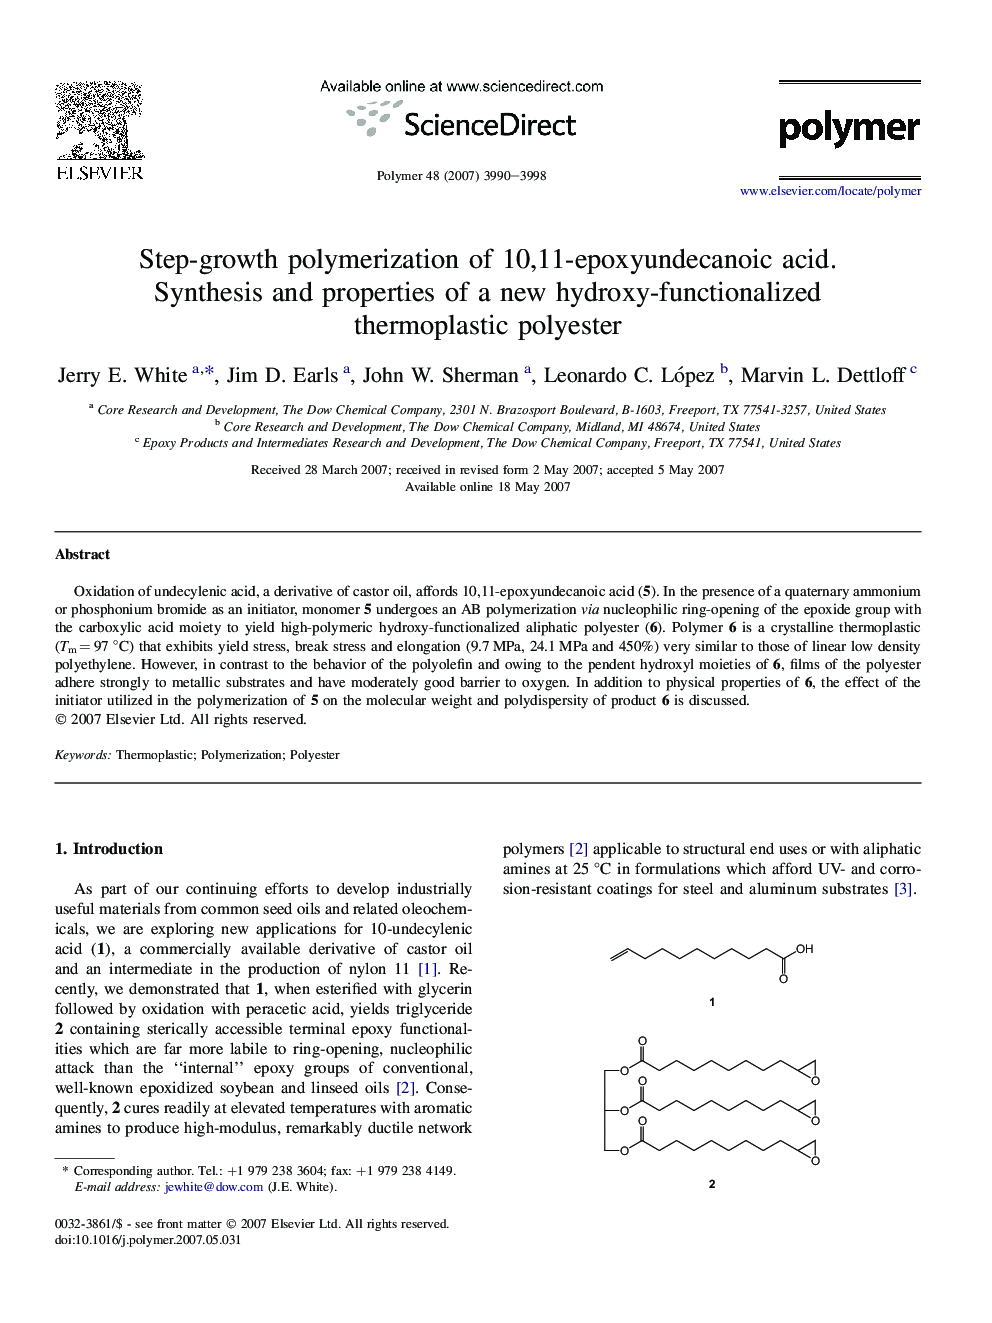 Step-growth polymerization of 10,11-epoxyundecanoic acid. Synthesis and properties of a new hydroxy-functionalized thermoplastic polyester